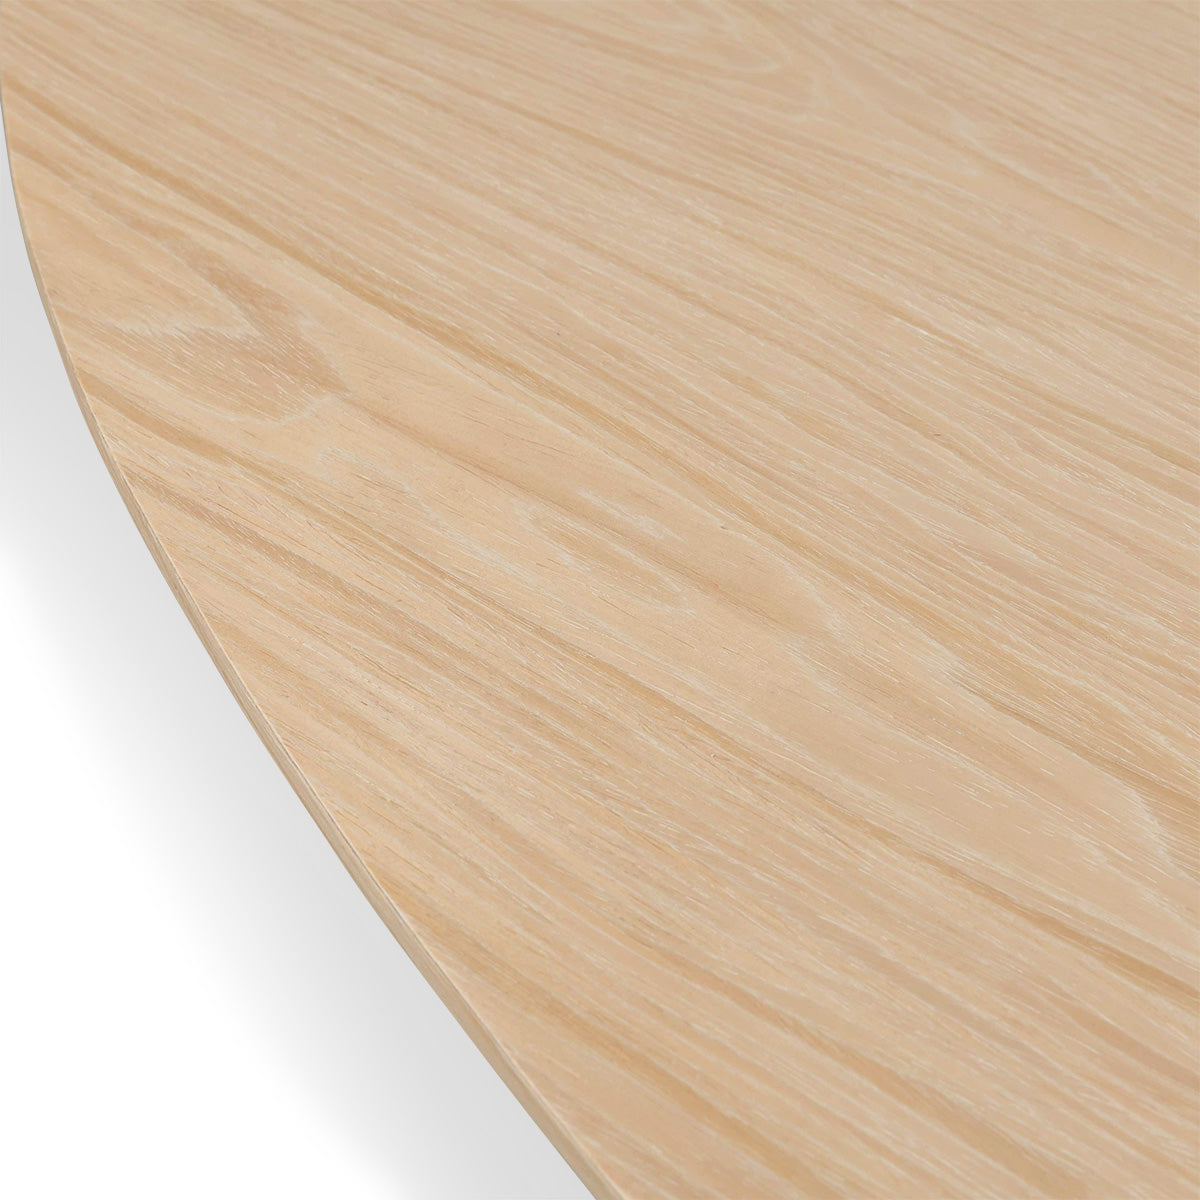 Eden Rock Oval Dining Table in White Washed Oak